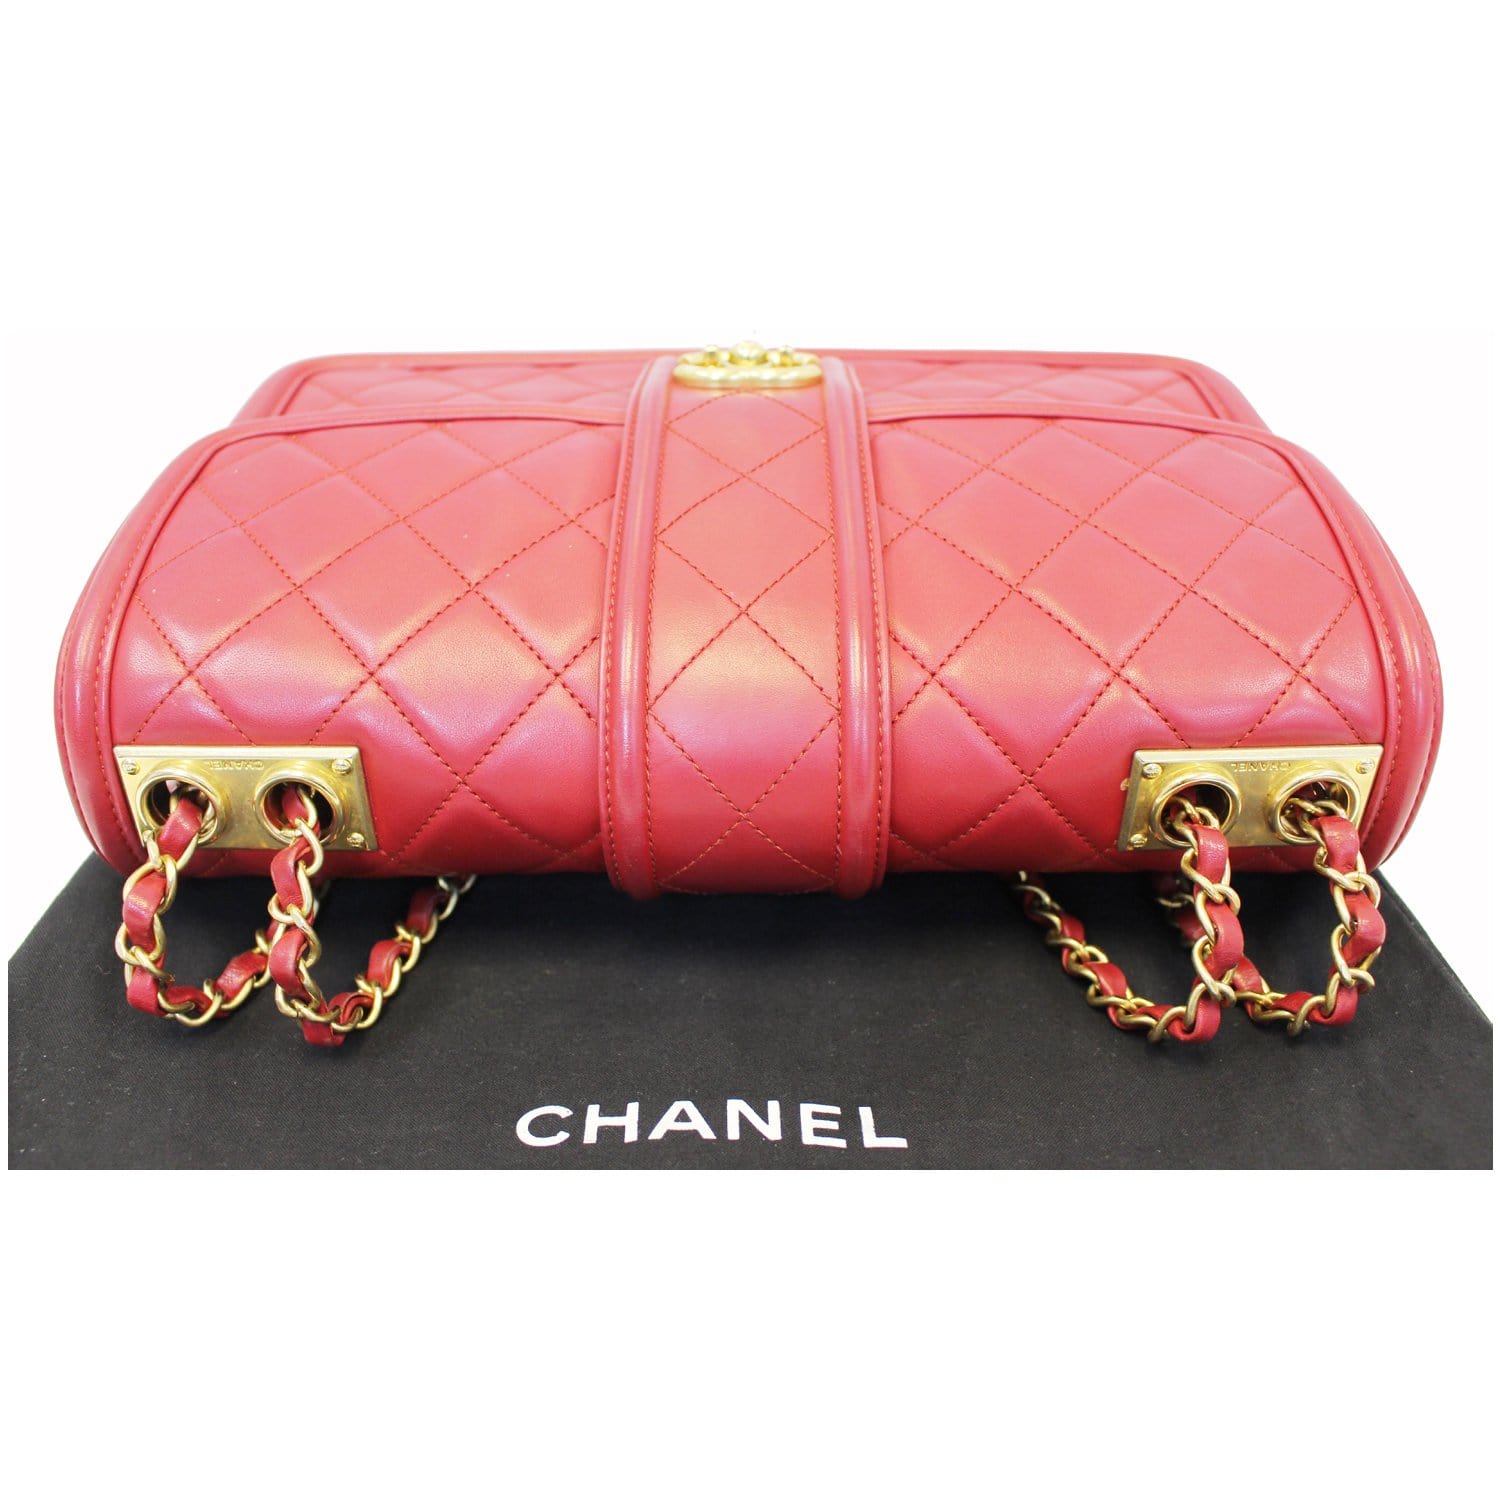 CHANEL Classic Flap Red Bags & Handbags for Women for sale